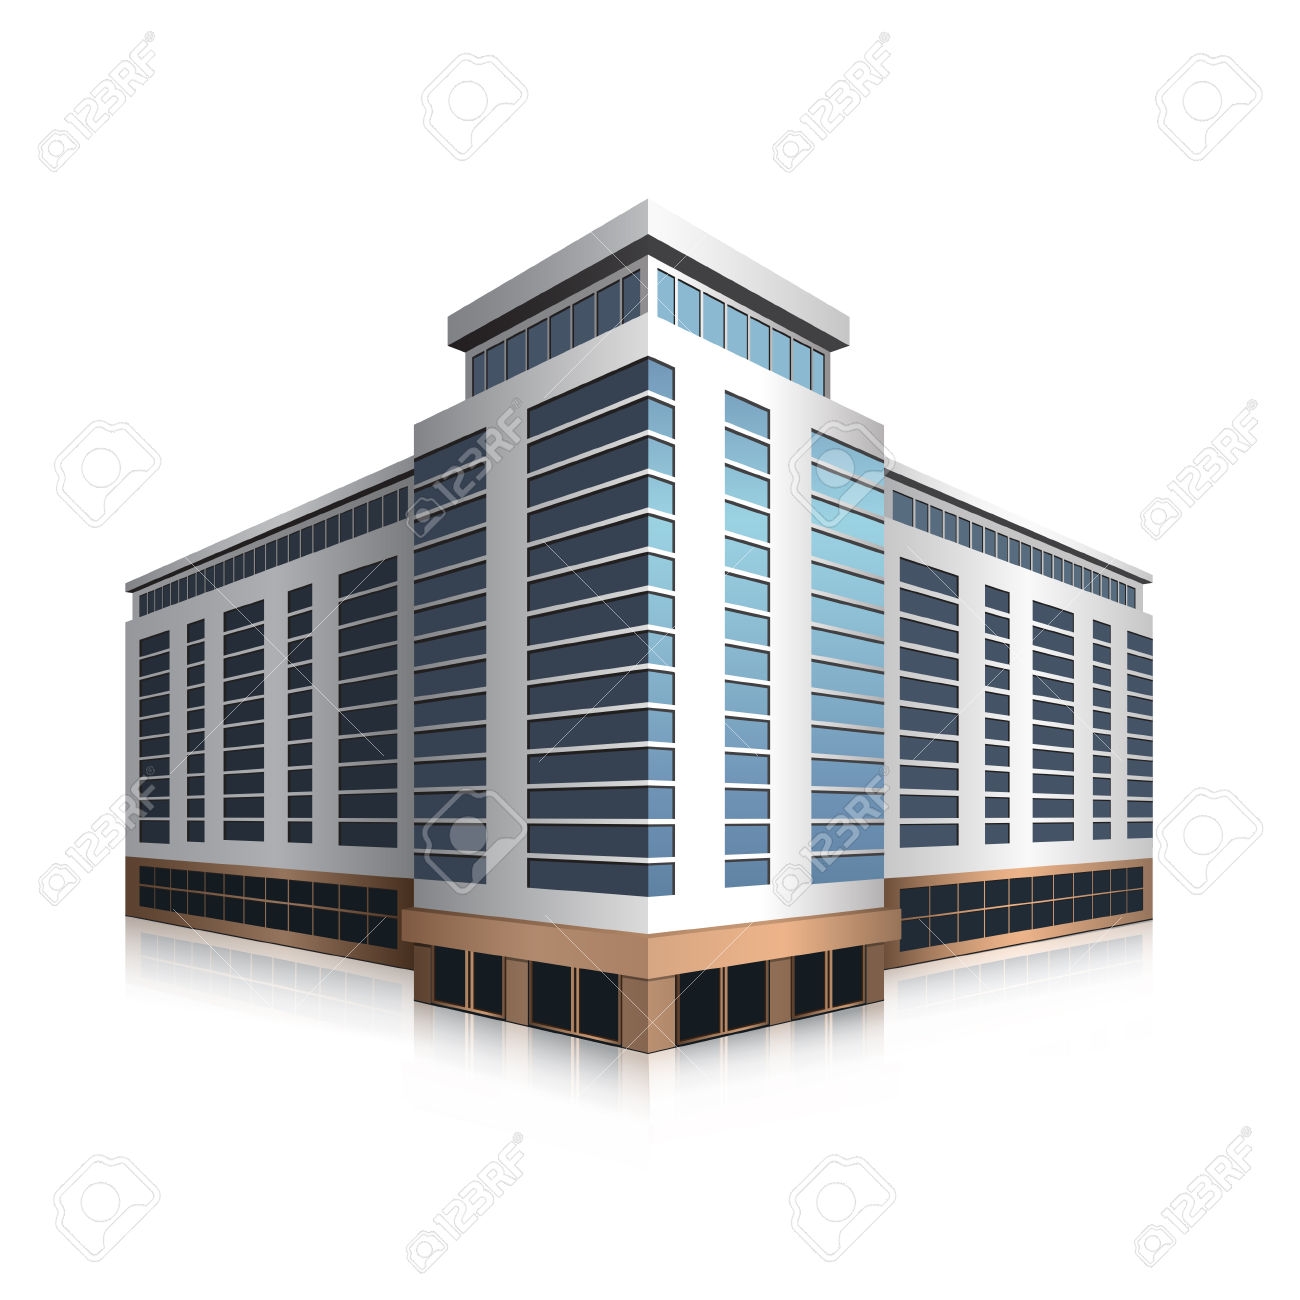 Buildings icons,  2,900 free files in PNG, EPS, SVG format